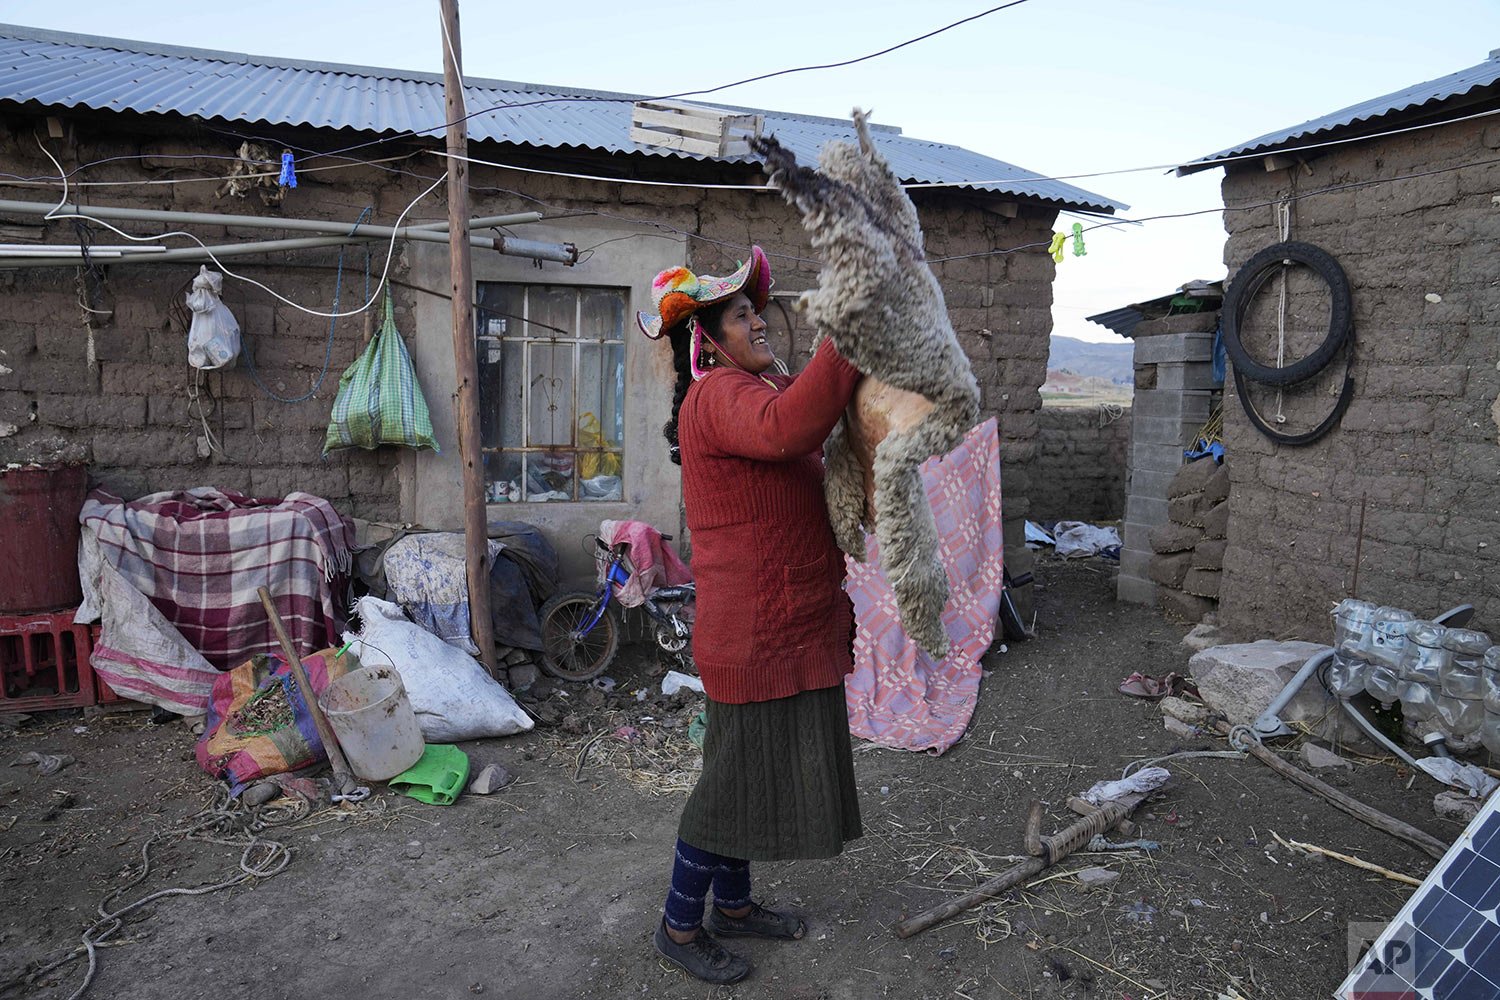  Maribel Vilca slips a dried sheepskin into a bag at her home in Jochi San Francisco, Peru, Oct. 29, 2021. Vilca said she will not be vaccinated for COVID-19 because she does not trust doctors. (AP Photo/Martin Mejia) 